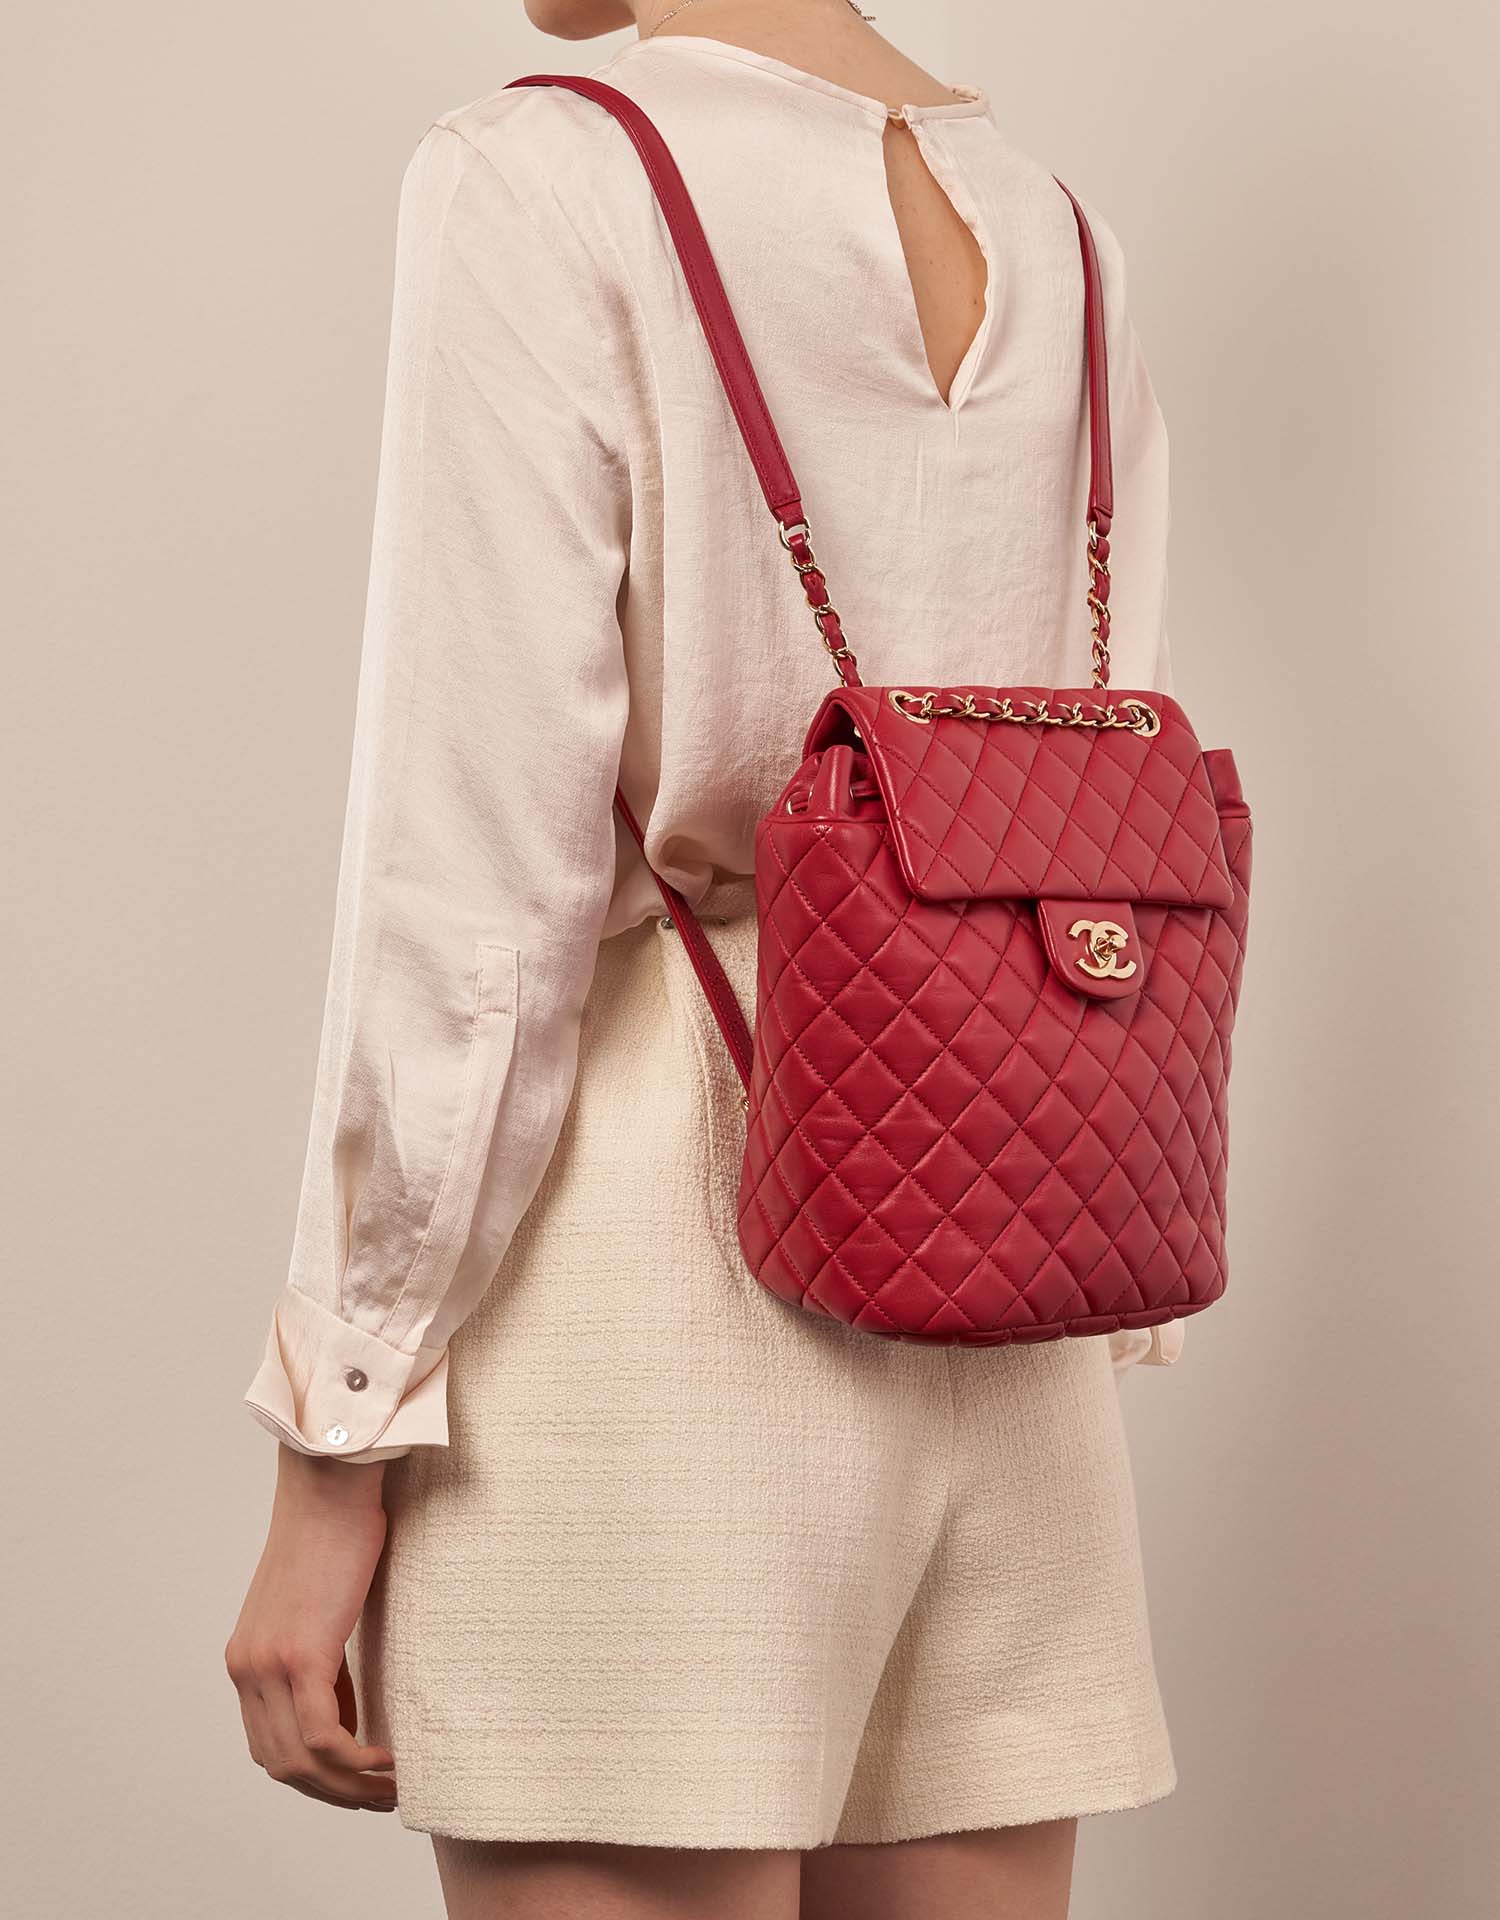 Chanel TimelessBackpack Red Sizes Worn | Sell your designer bag on Saclab.com